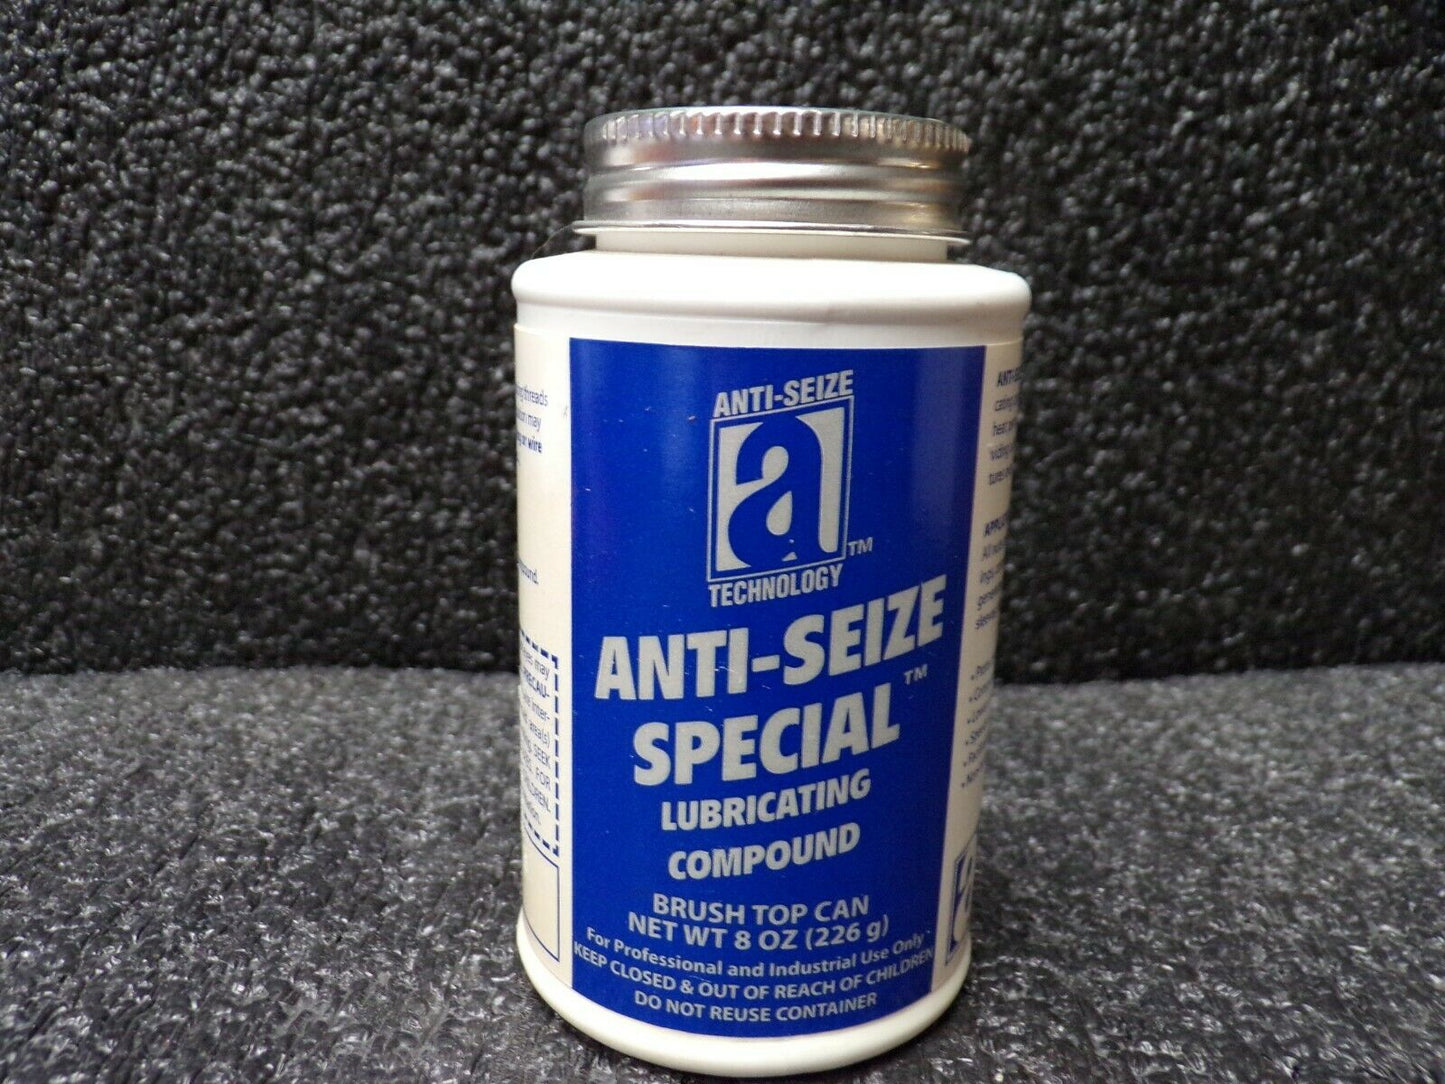 Anti-Seize Special Lubricating Compound, 8oz Brush Top Can, (183918035149-X03)